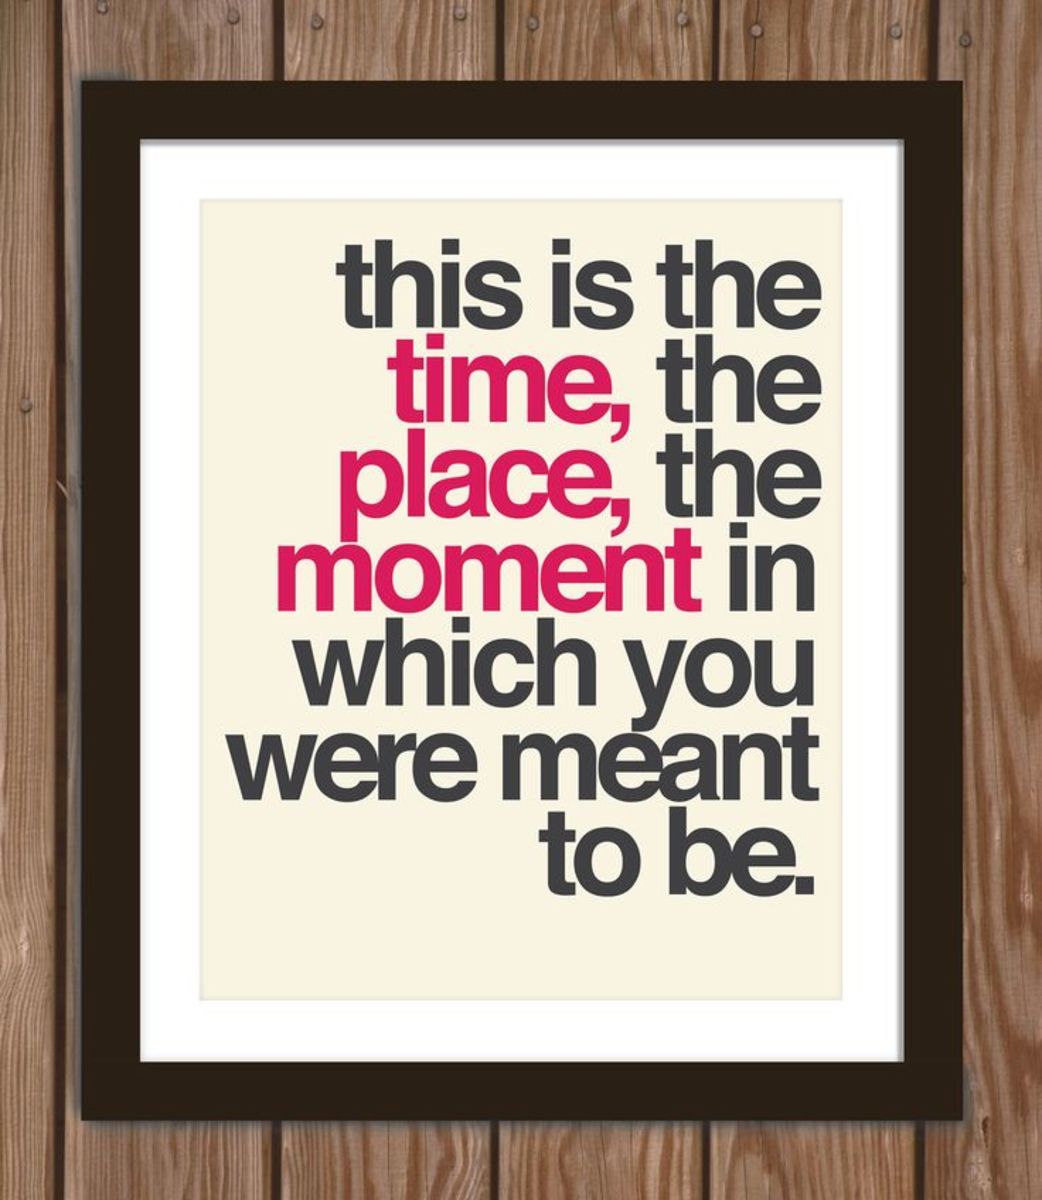 "This is the time, the place, the moment in which you were meant to be."